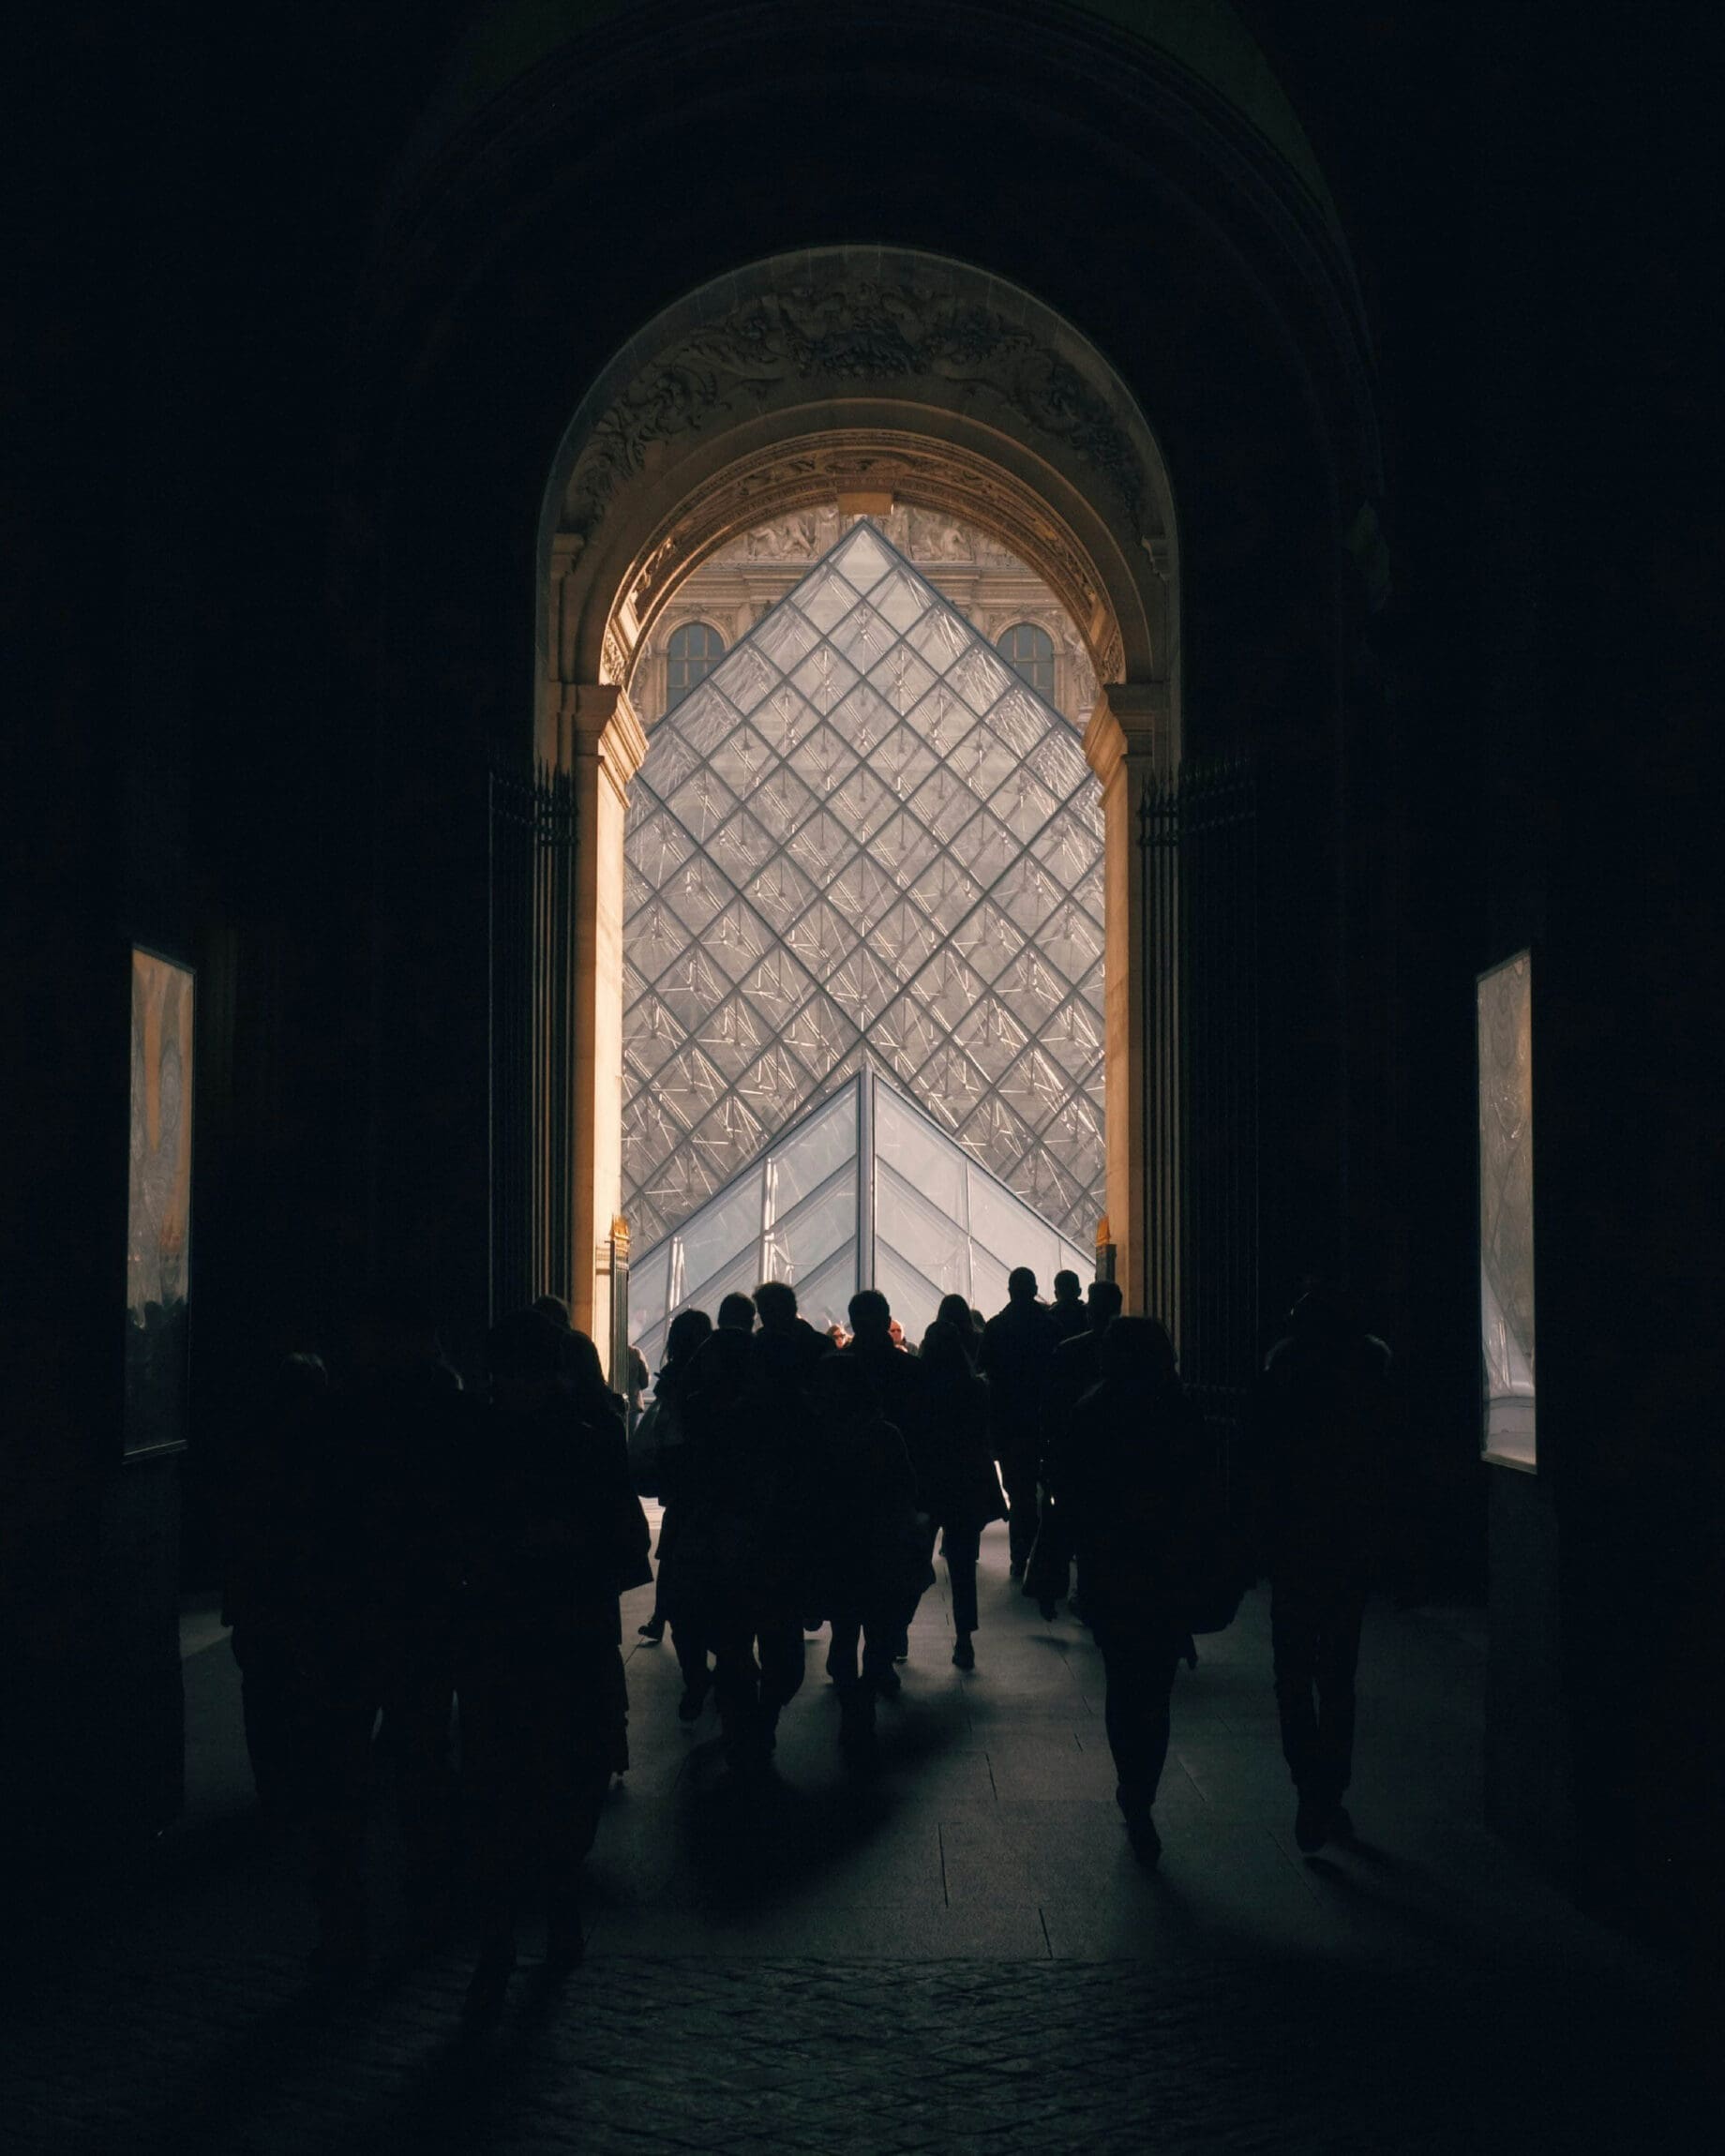 The best art galleries and museums in Paris | An interior view of The Louvre with the glass pyramid visible.